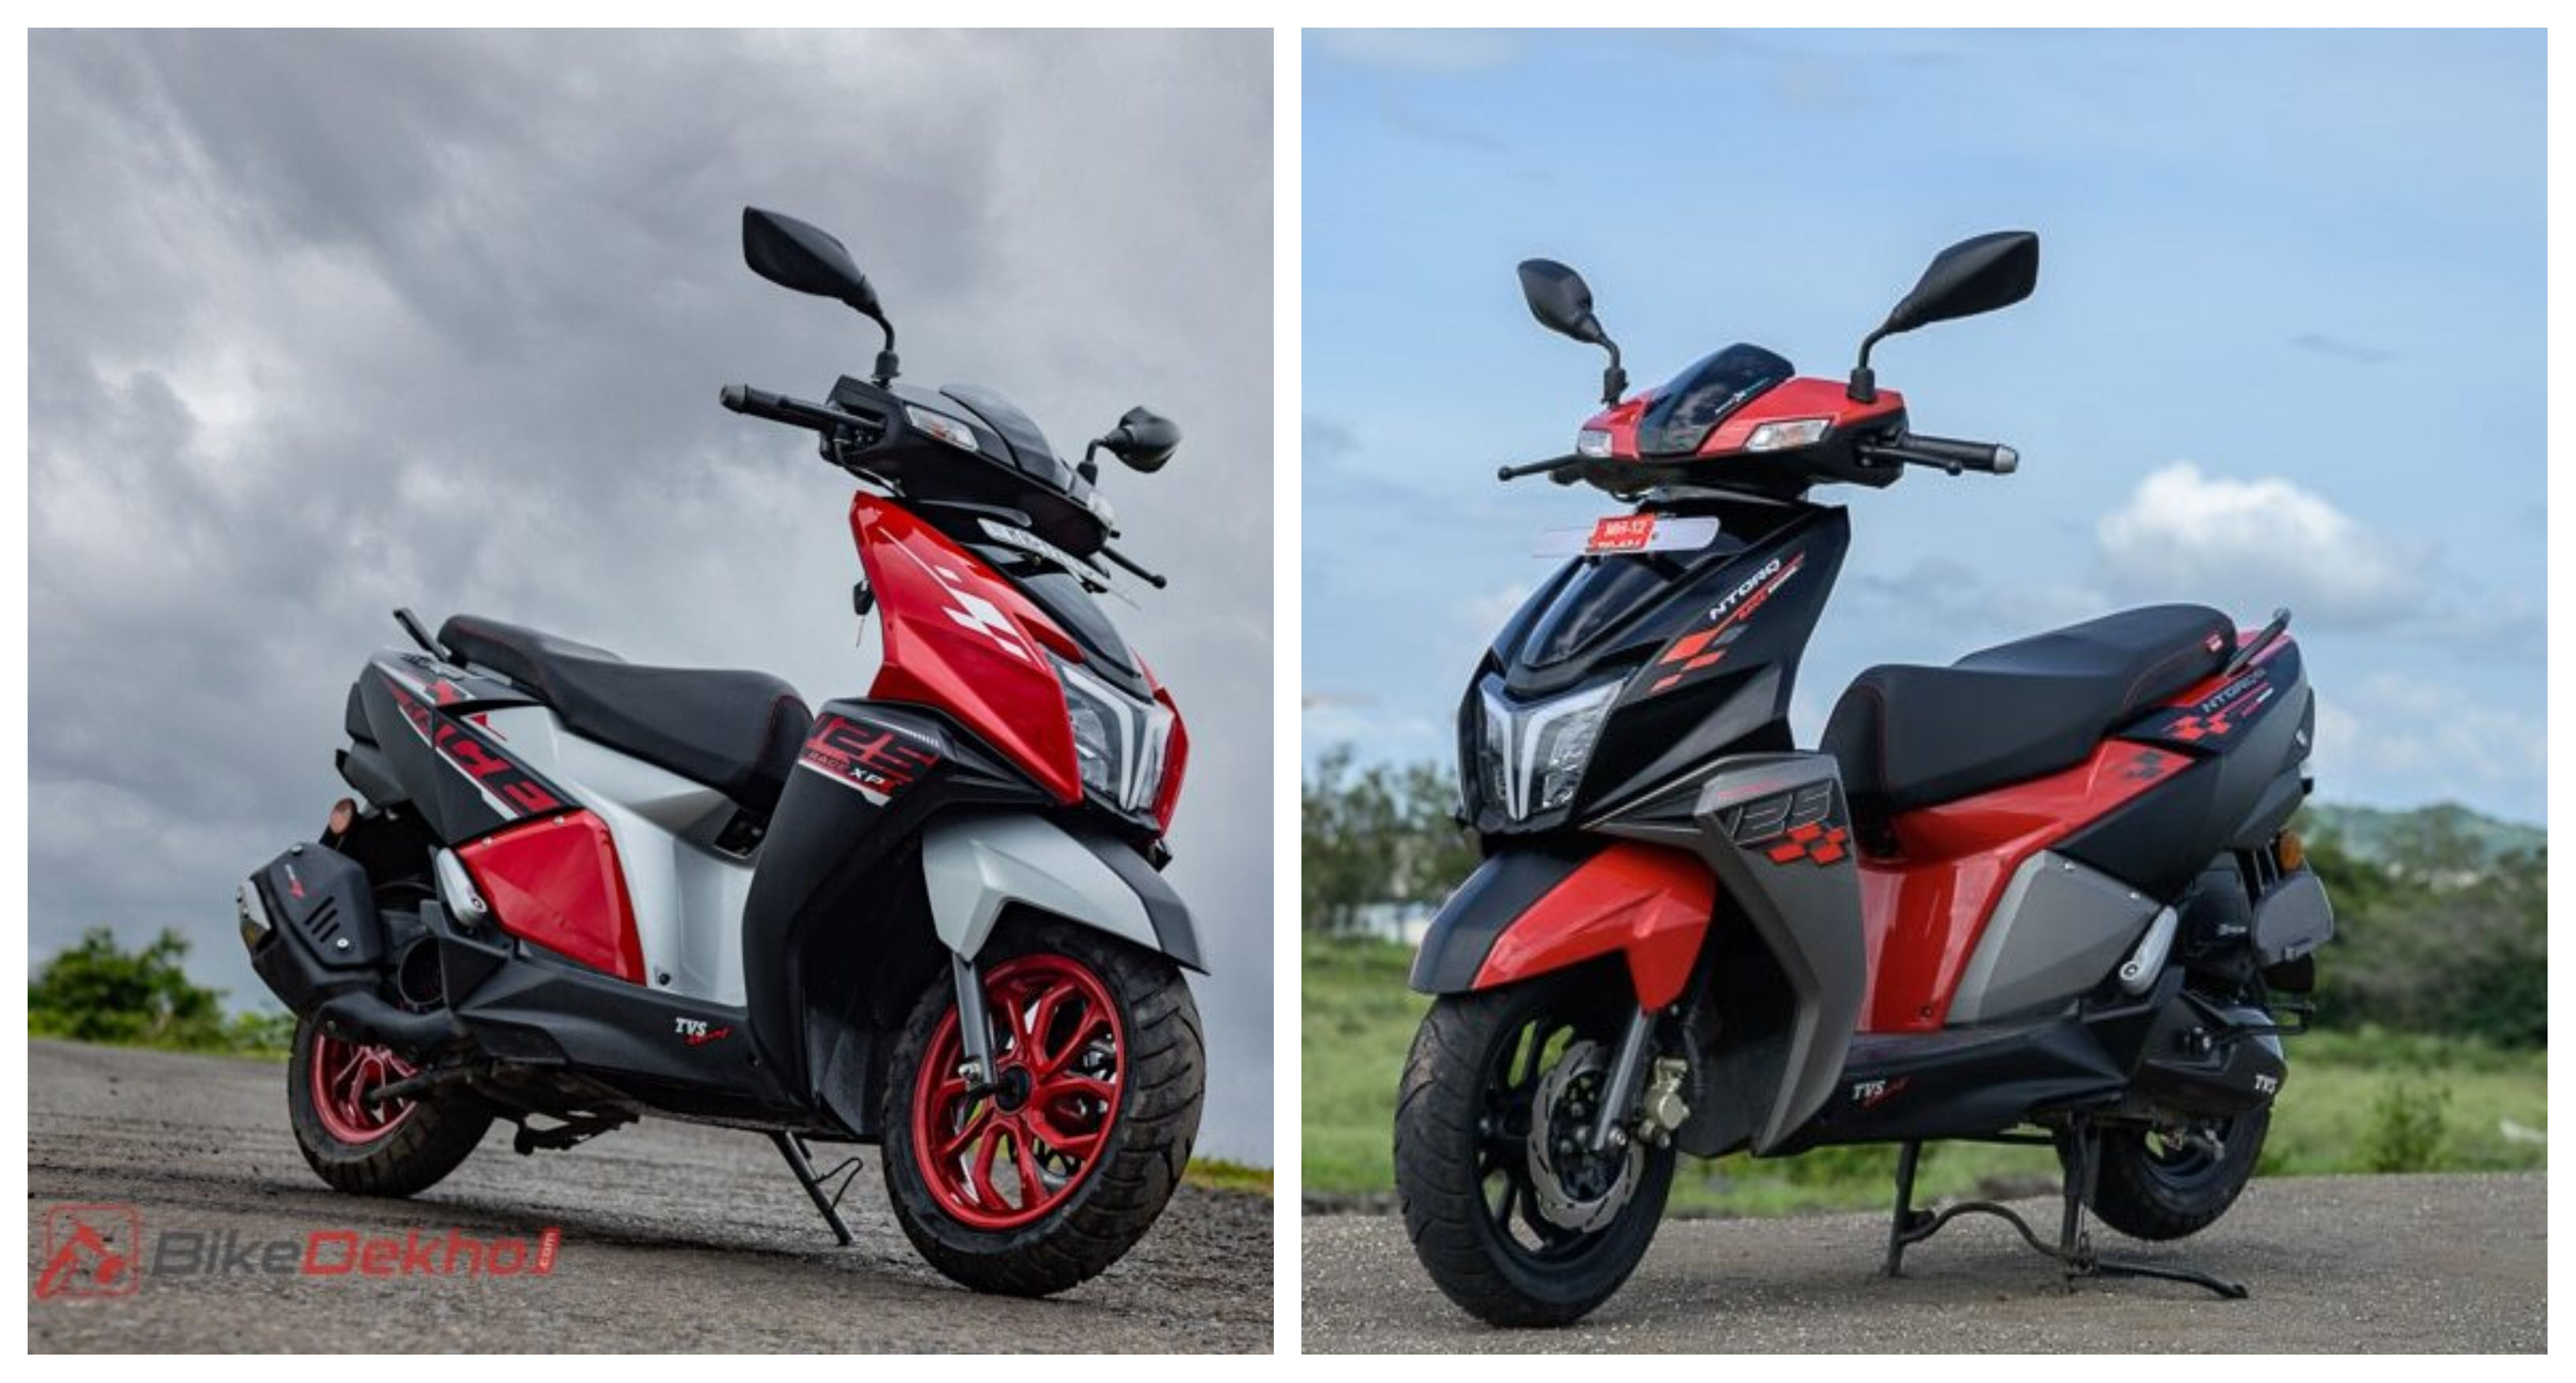 Share 157+ images comparison between tvs ntorq and honda dio - In ...